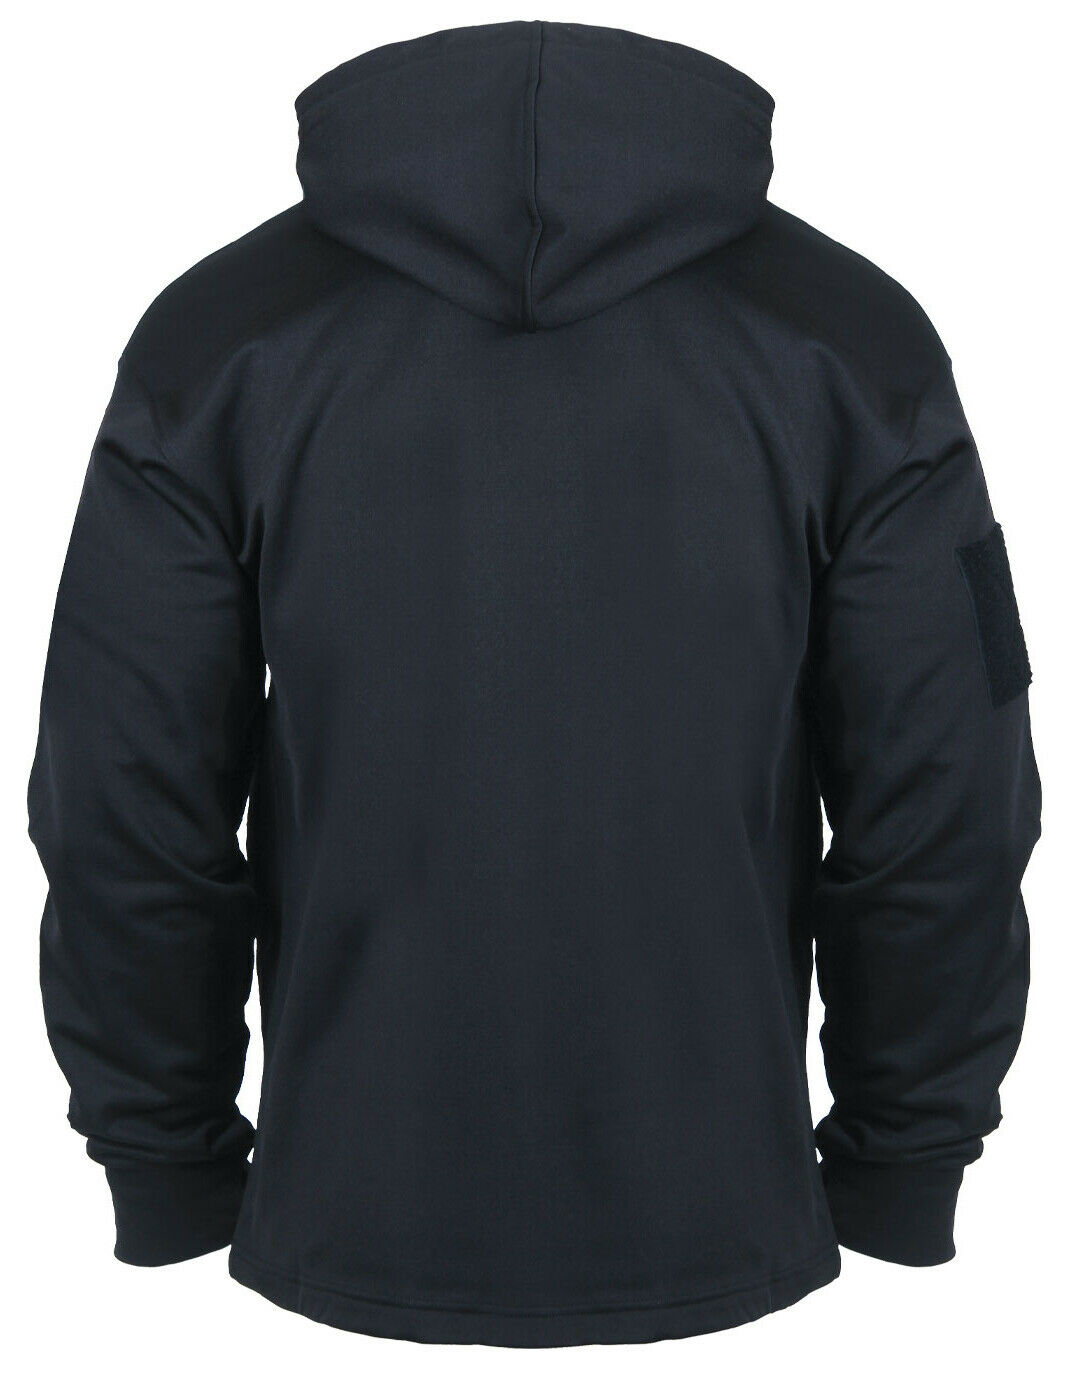 Rothco Concealed Carry Hoodie - Midnight Navy Blue